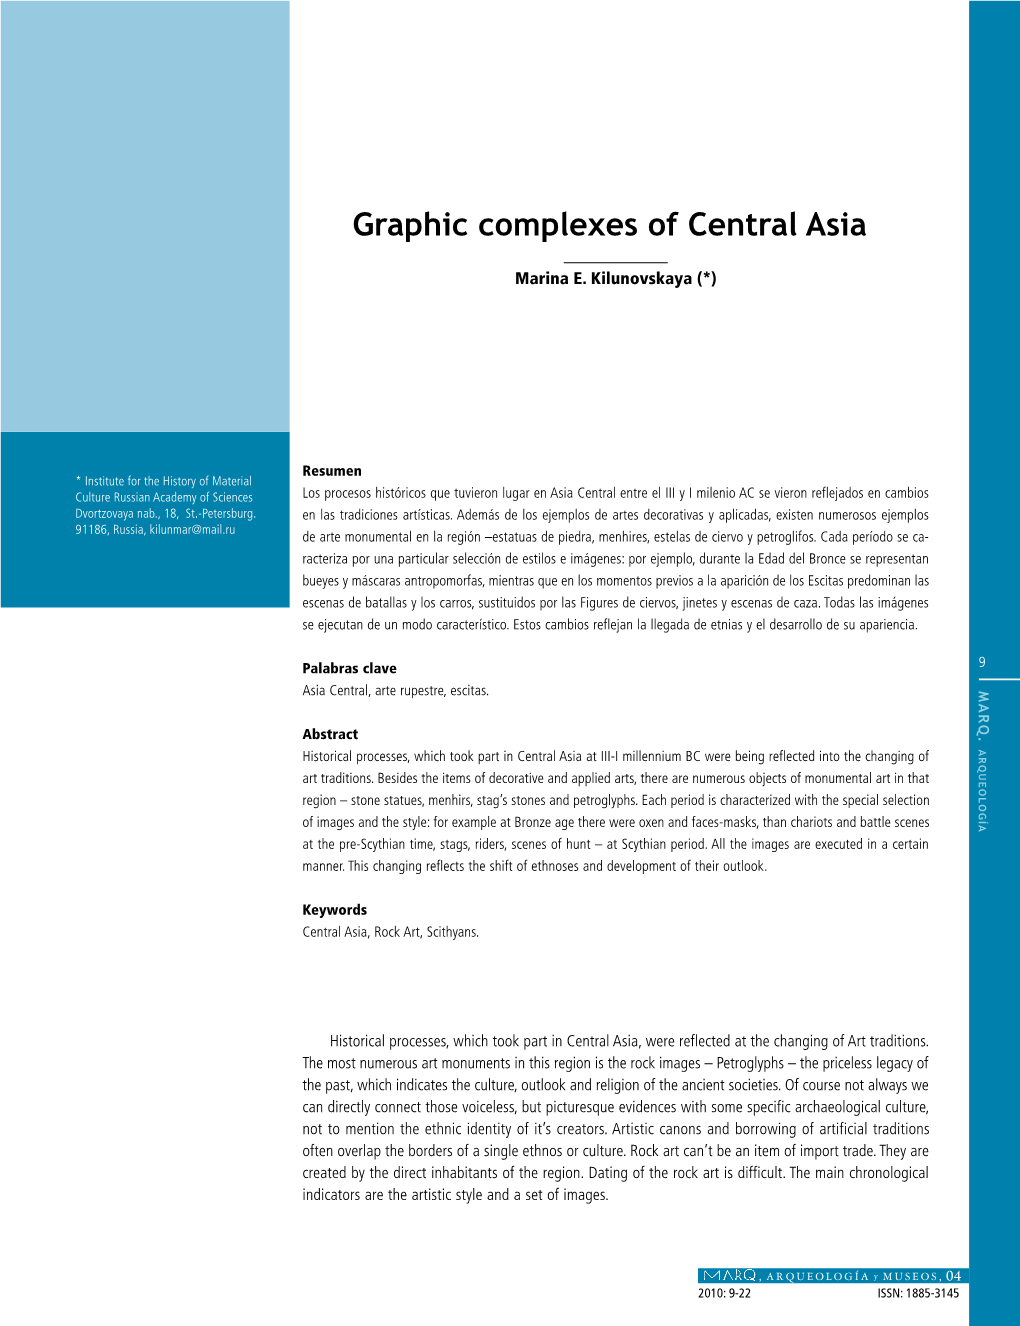 Graphic Complexes of Central Asia